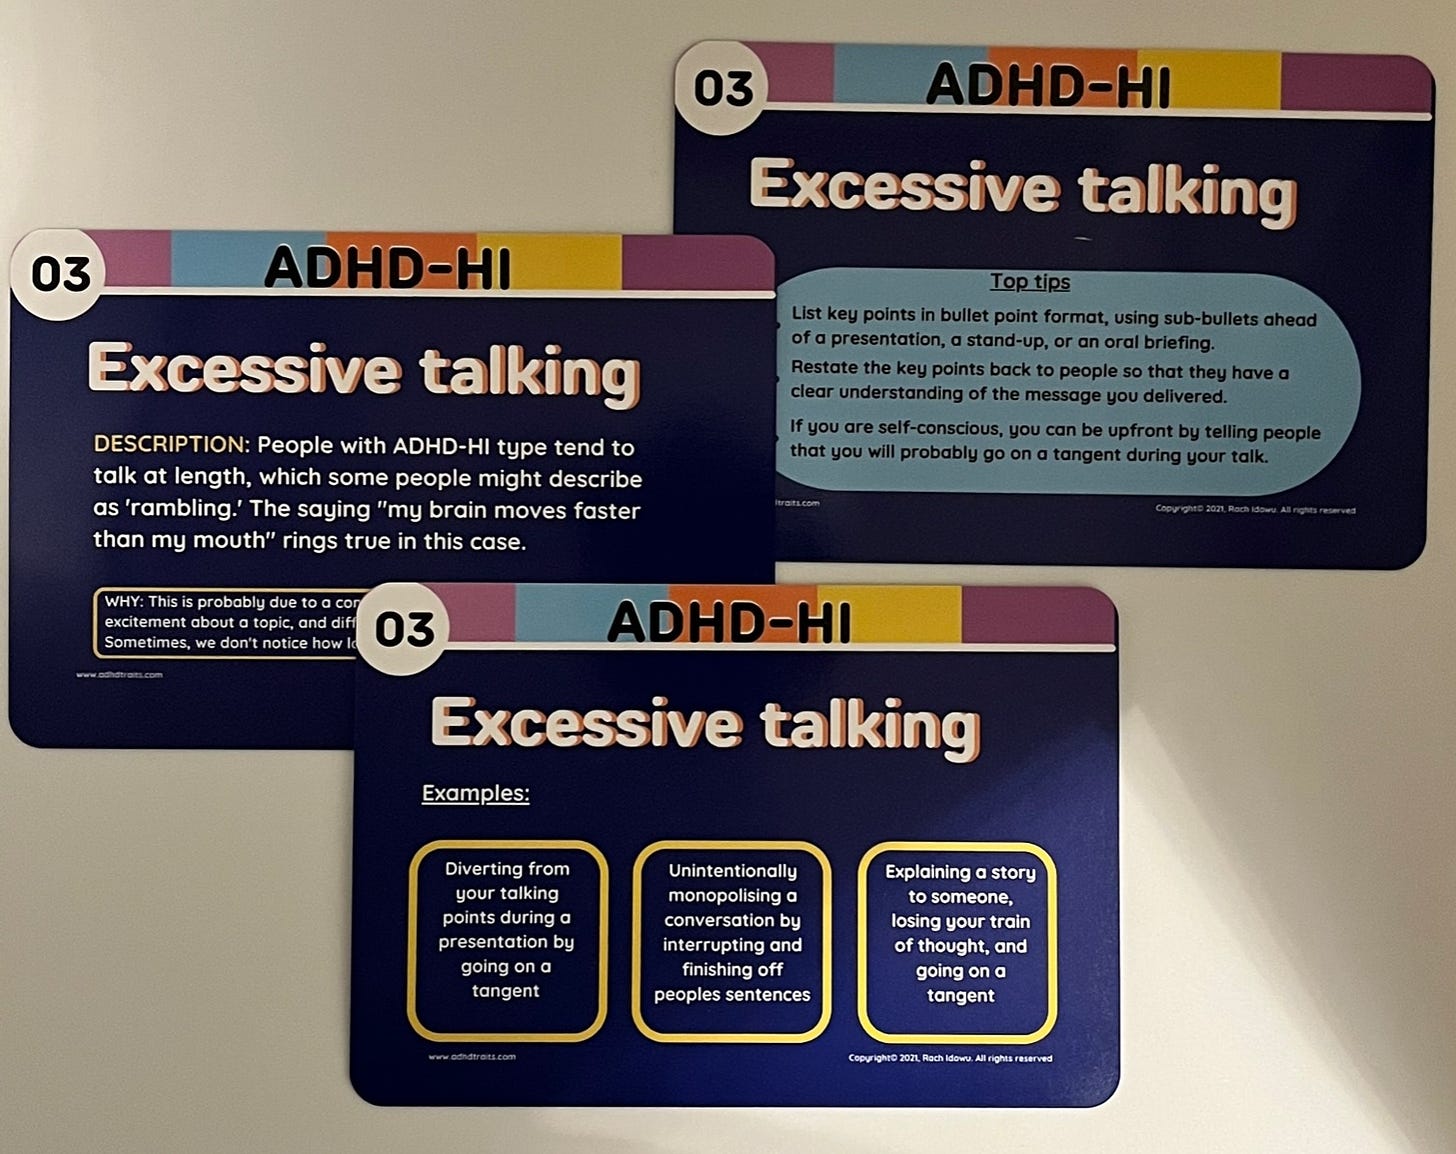 Examples of the deck structure, using the trait ‘Excessive talking’ that includes a description, examples, and top tips.